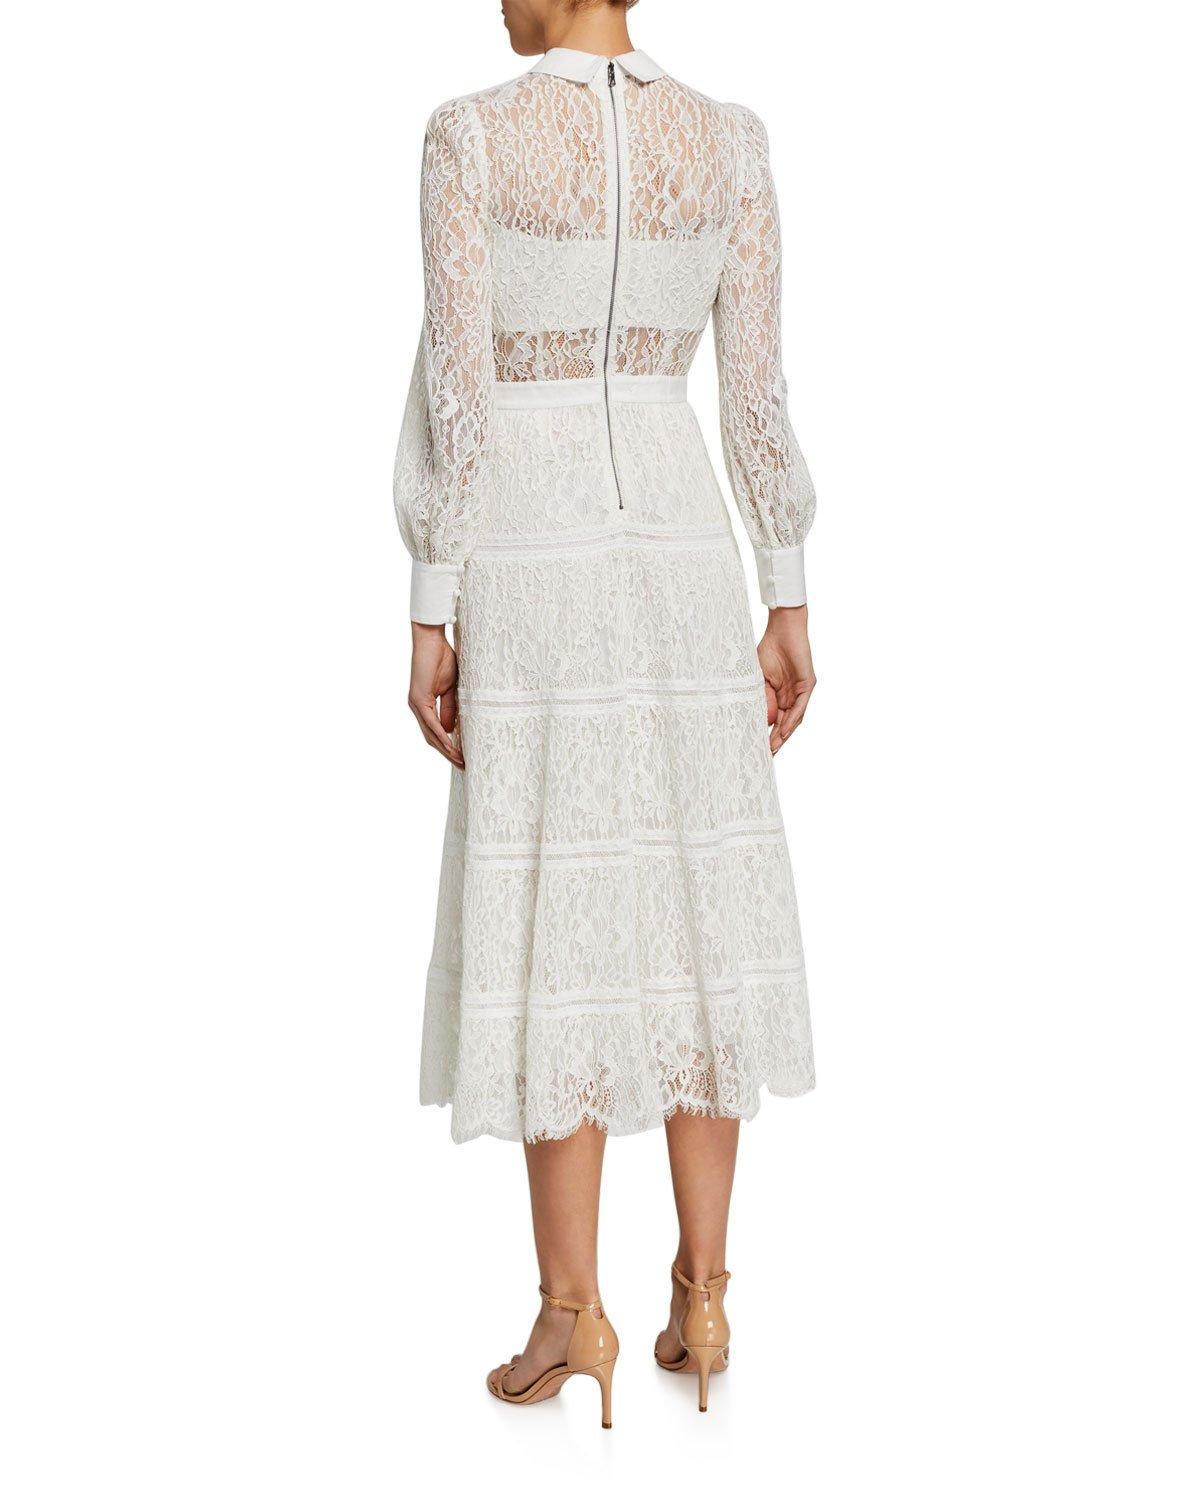 Alice + Olivia Lace Anaya Collared Tiered Dress in White - Lyst